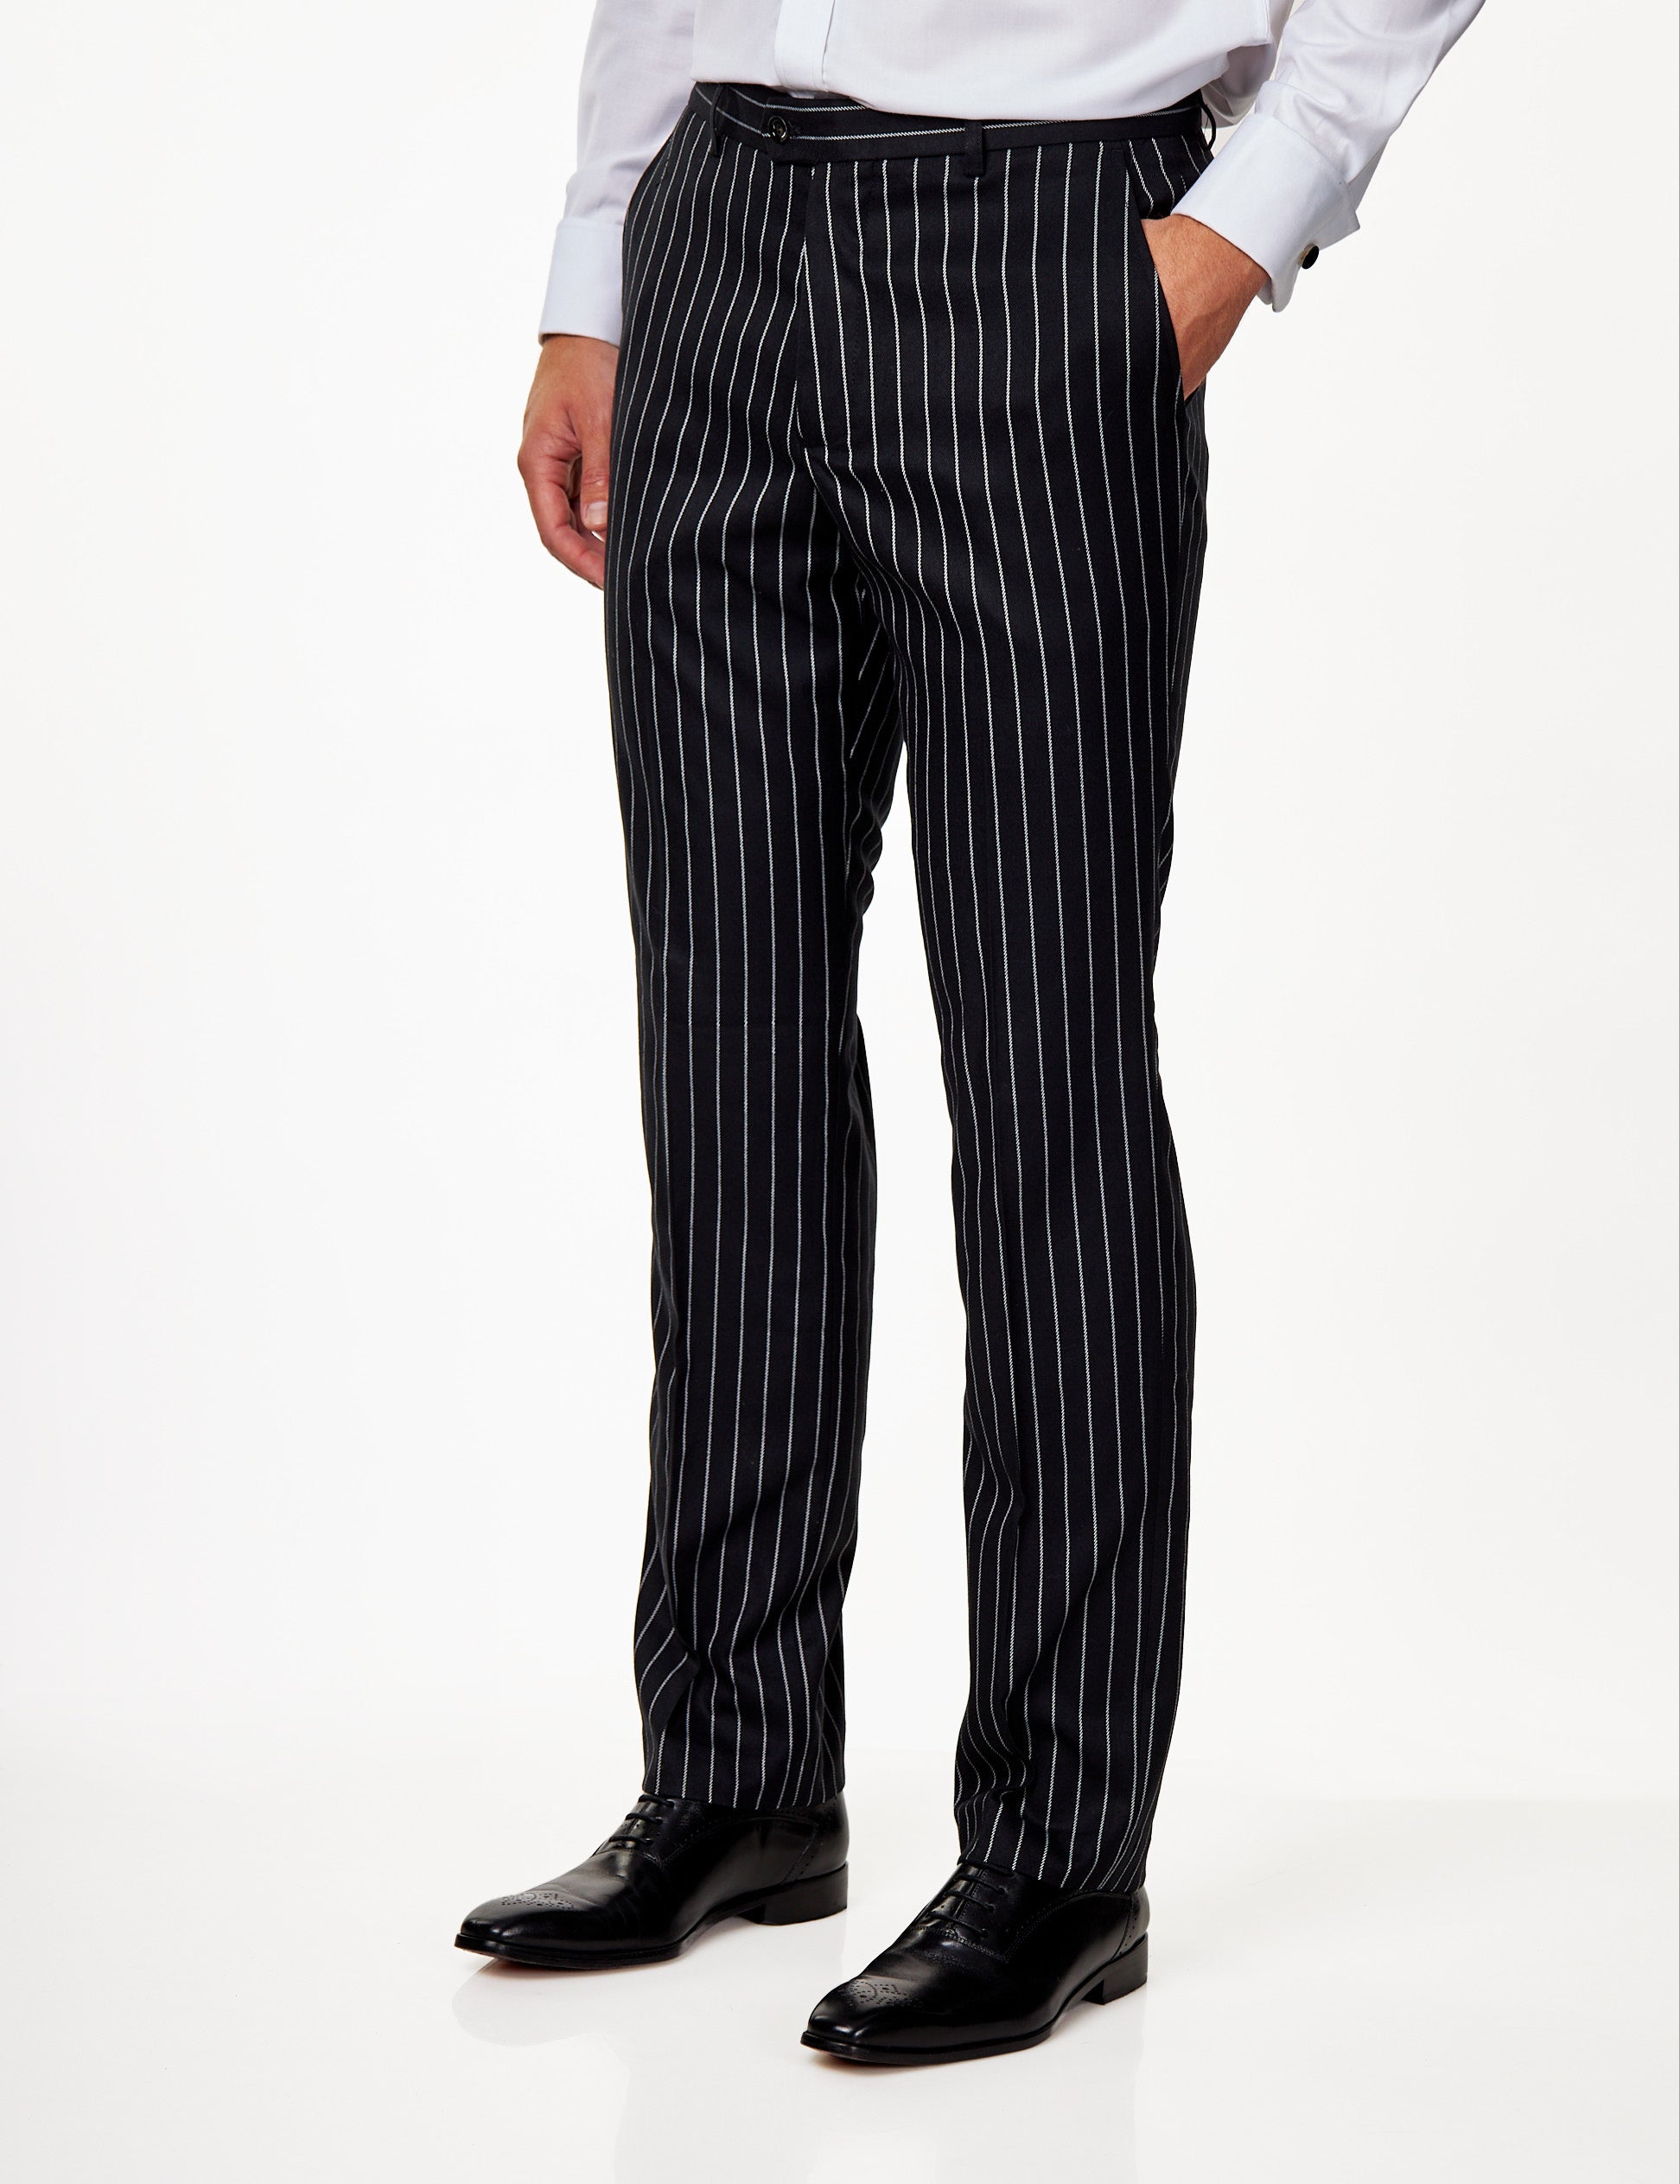 ALFRED - Black Chalk Stripe Double Breasted Suit